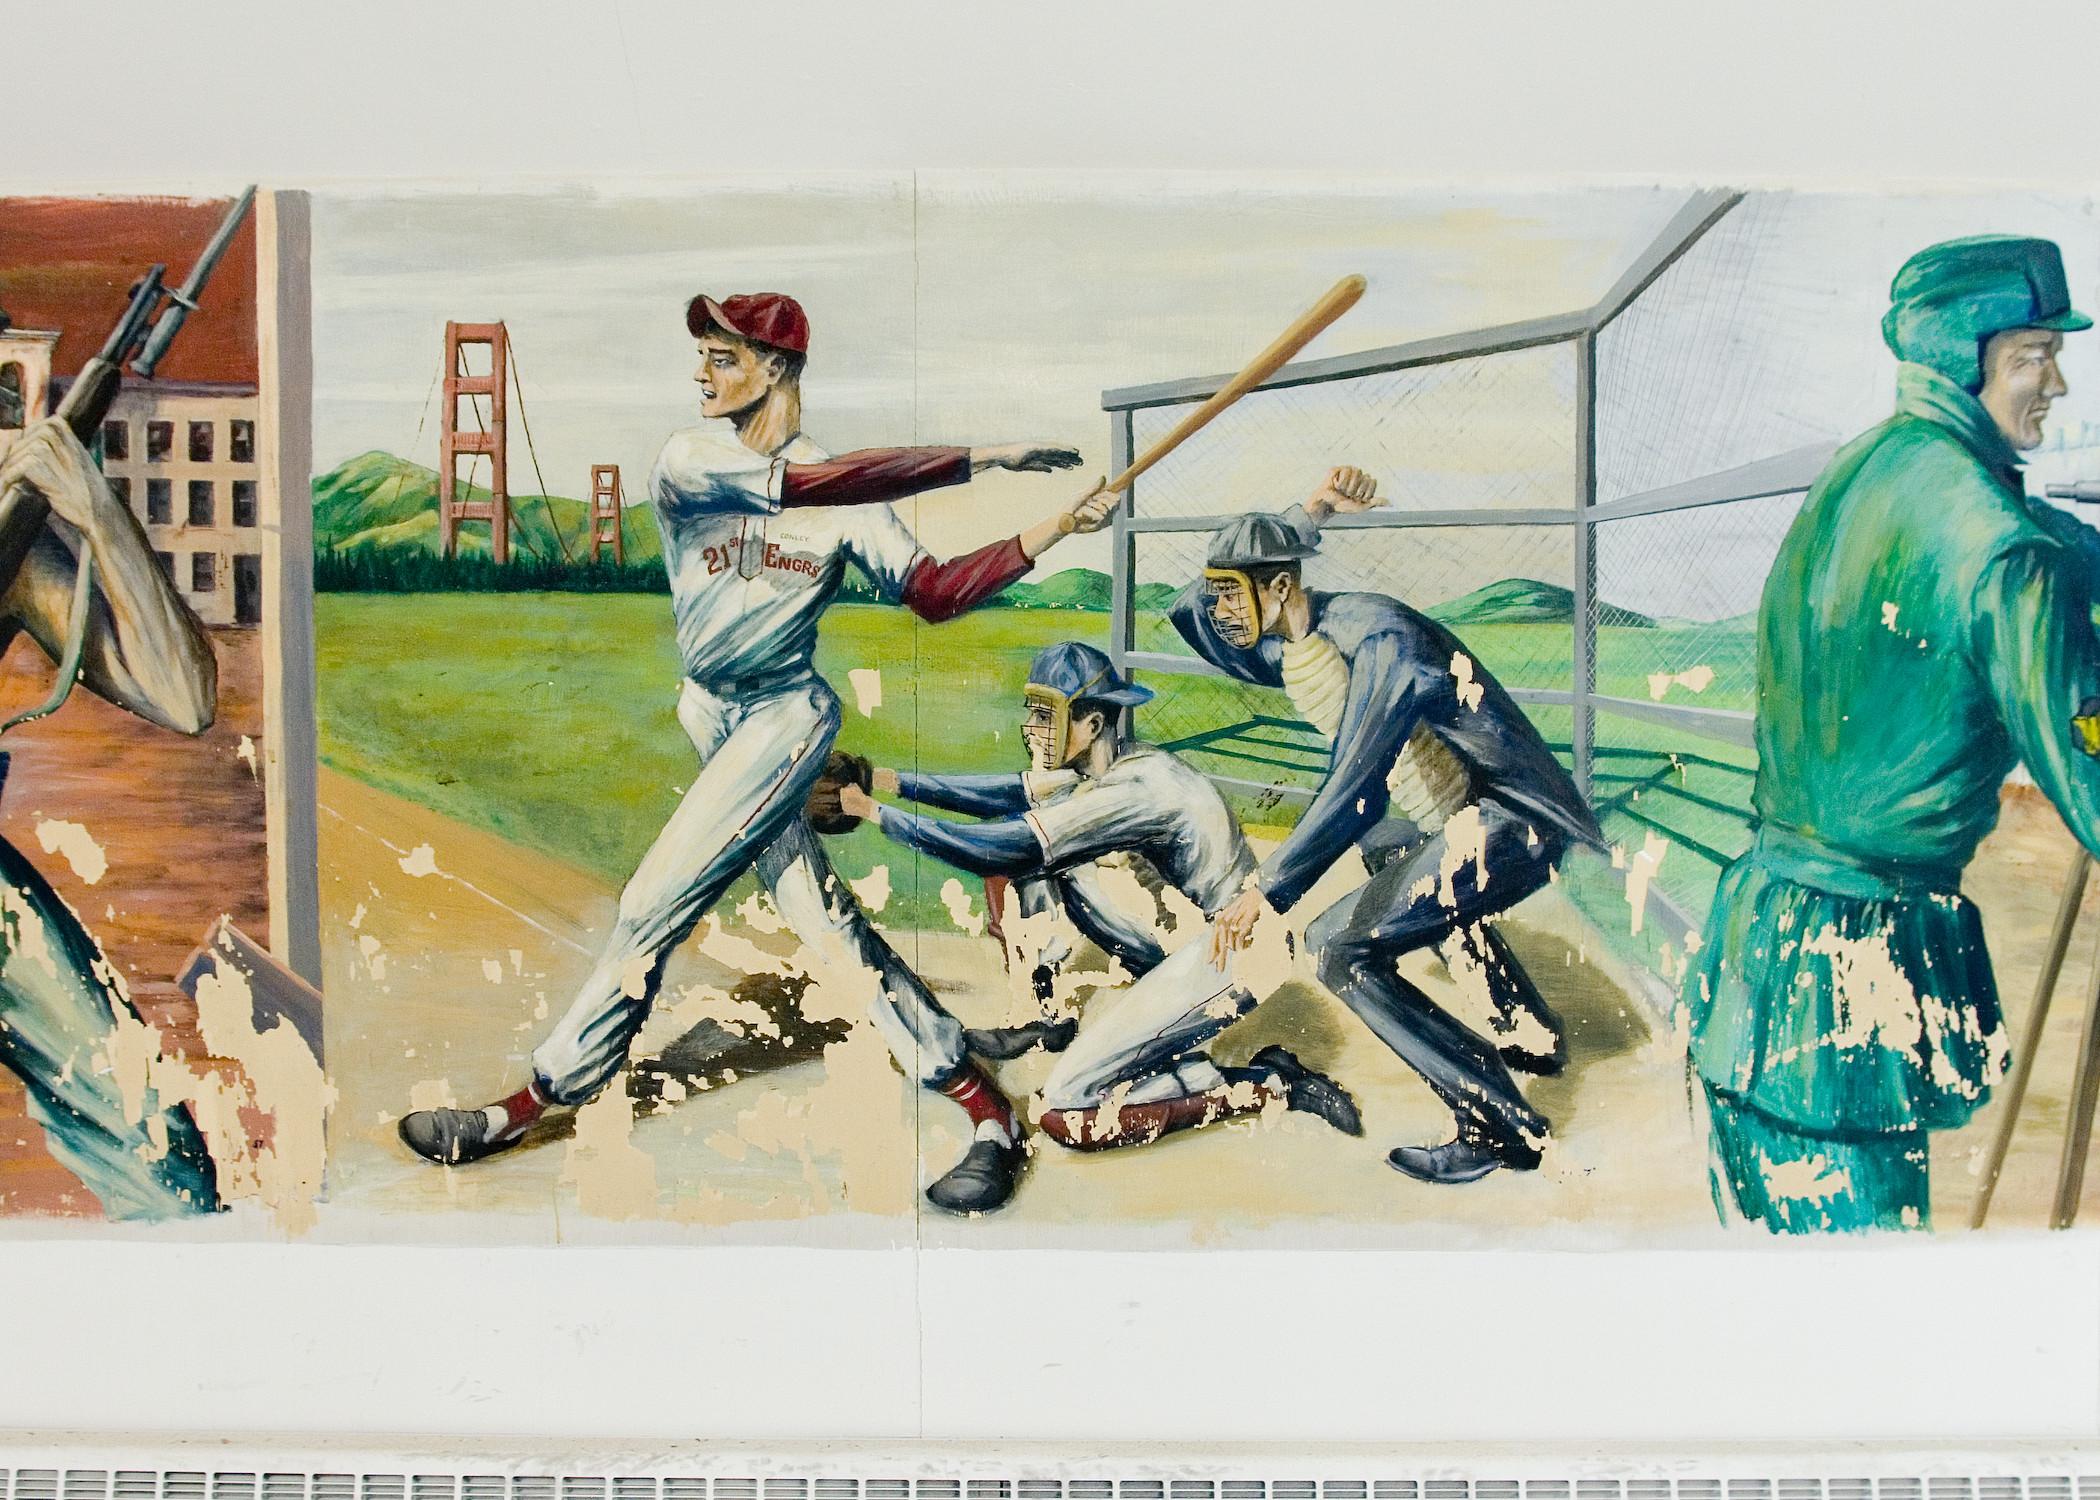 Mural of Baseball players batting on field with Golden Gate Bridge in the background